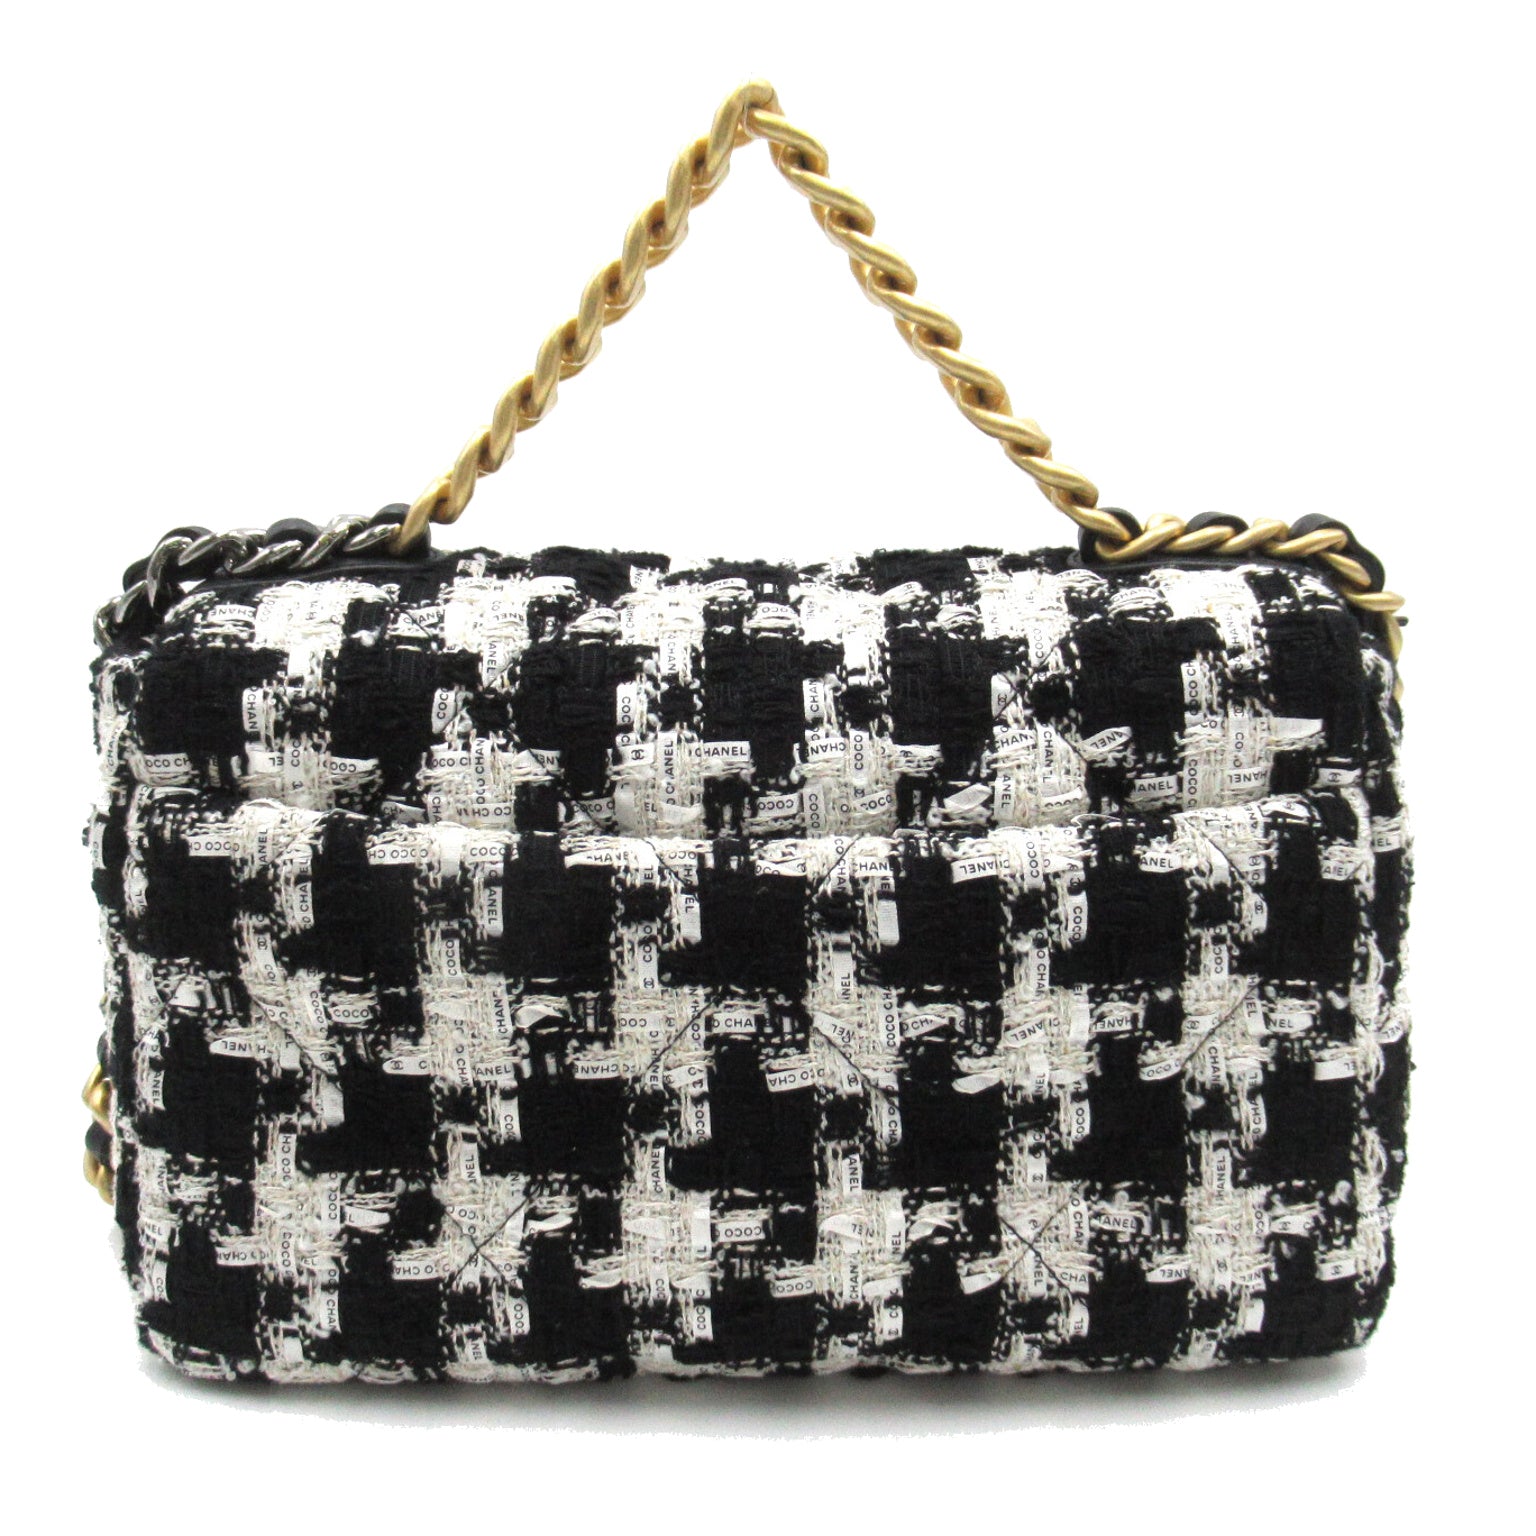 CHANEL CHANEL 19 Chain Shoulder Bag Tweed/Wall/Leather  Black/White AS1160